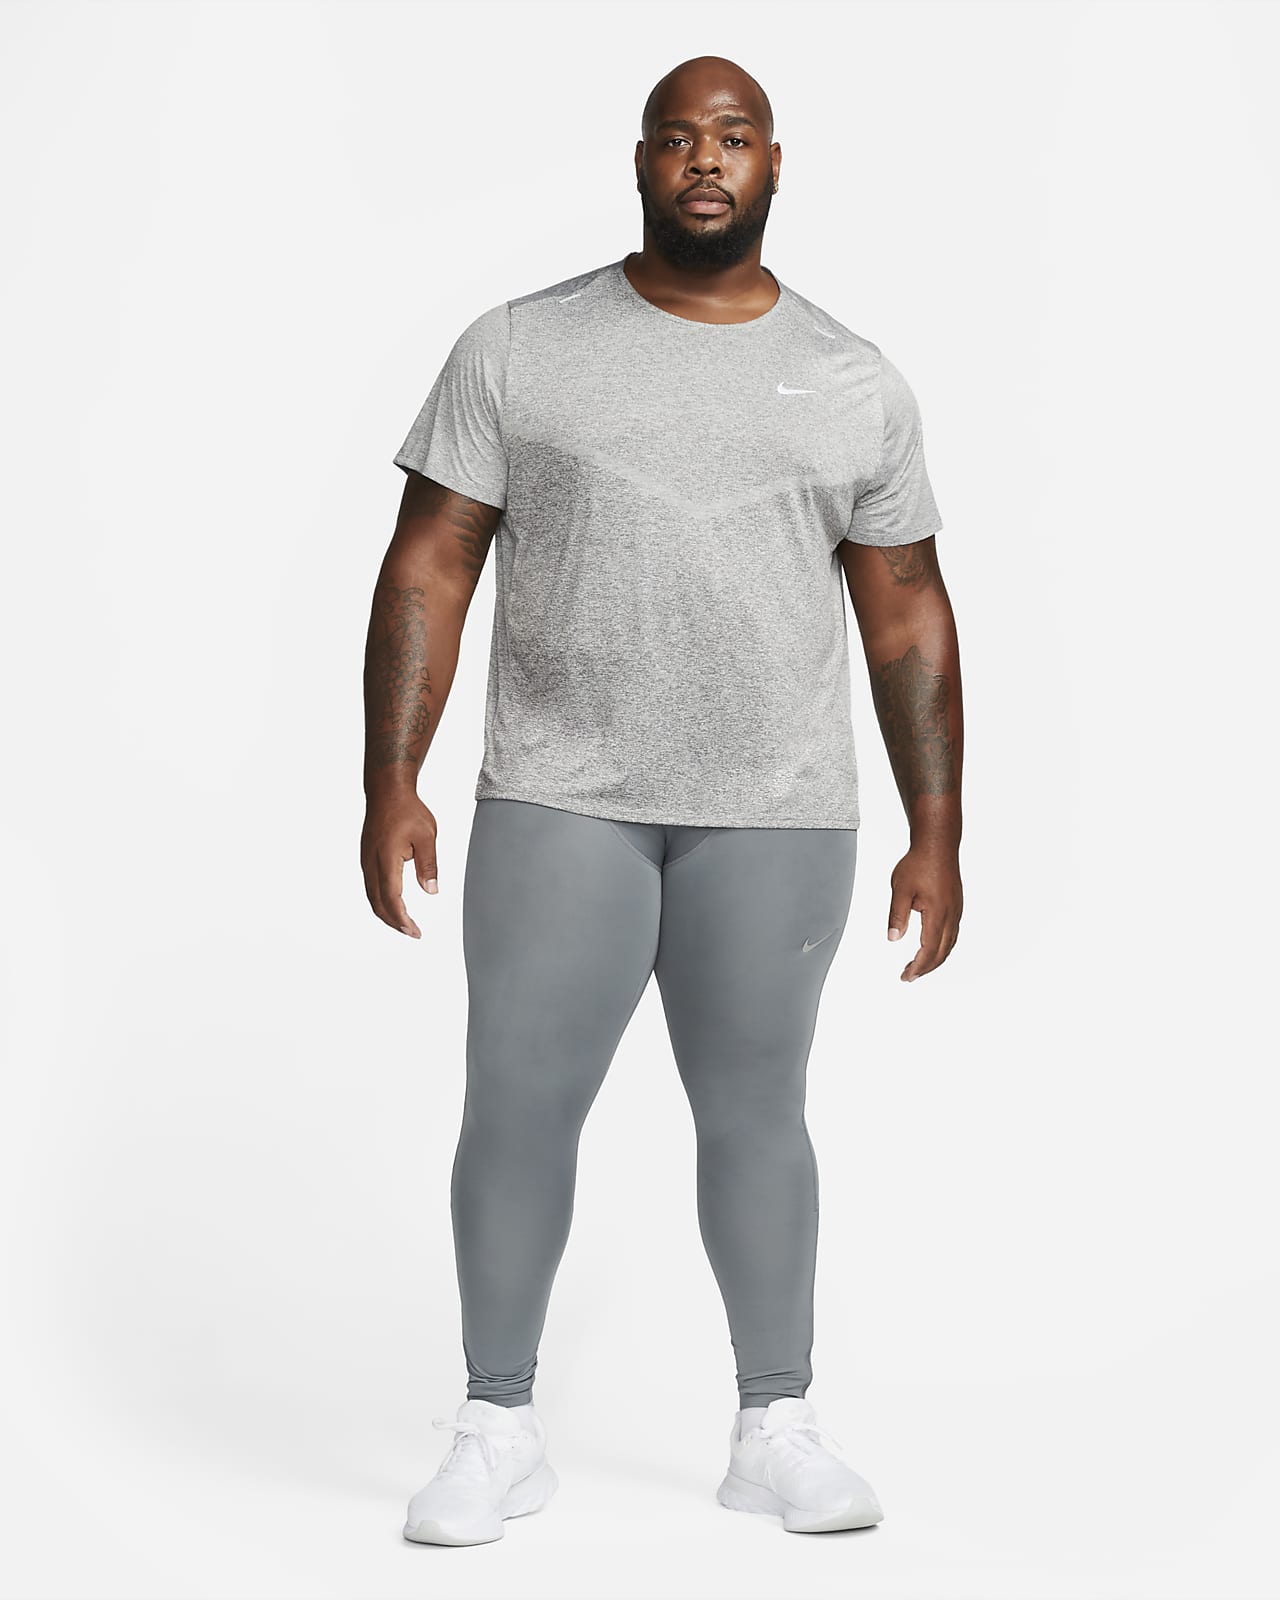 Nike Running Challenger tights in black